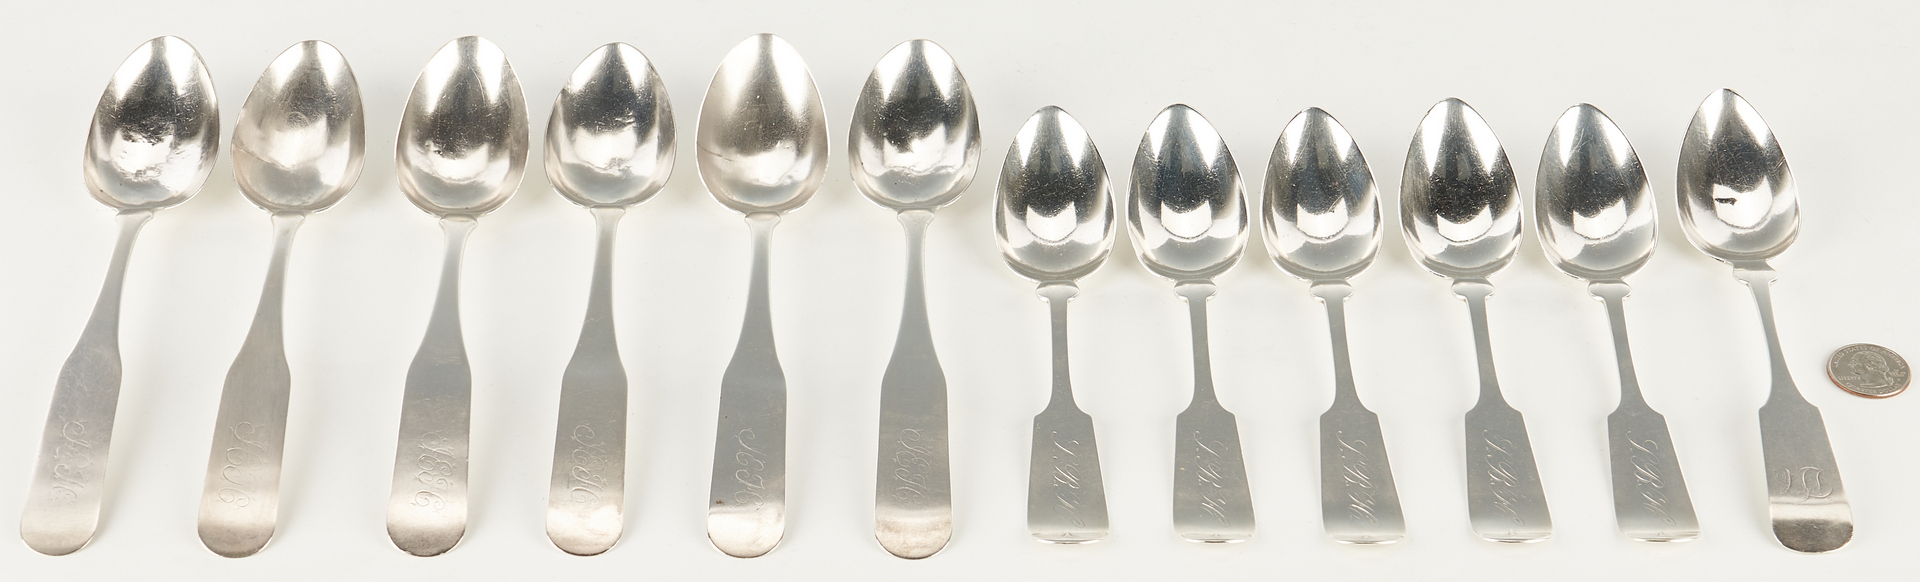 Lot 319: 12 Coin and Sterling Silver Spoons inc. Nashville, Negrin